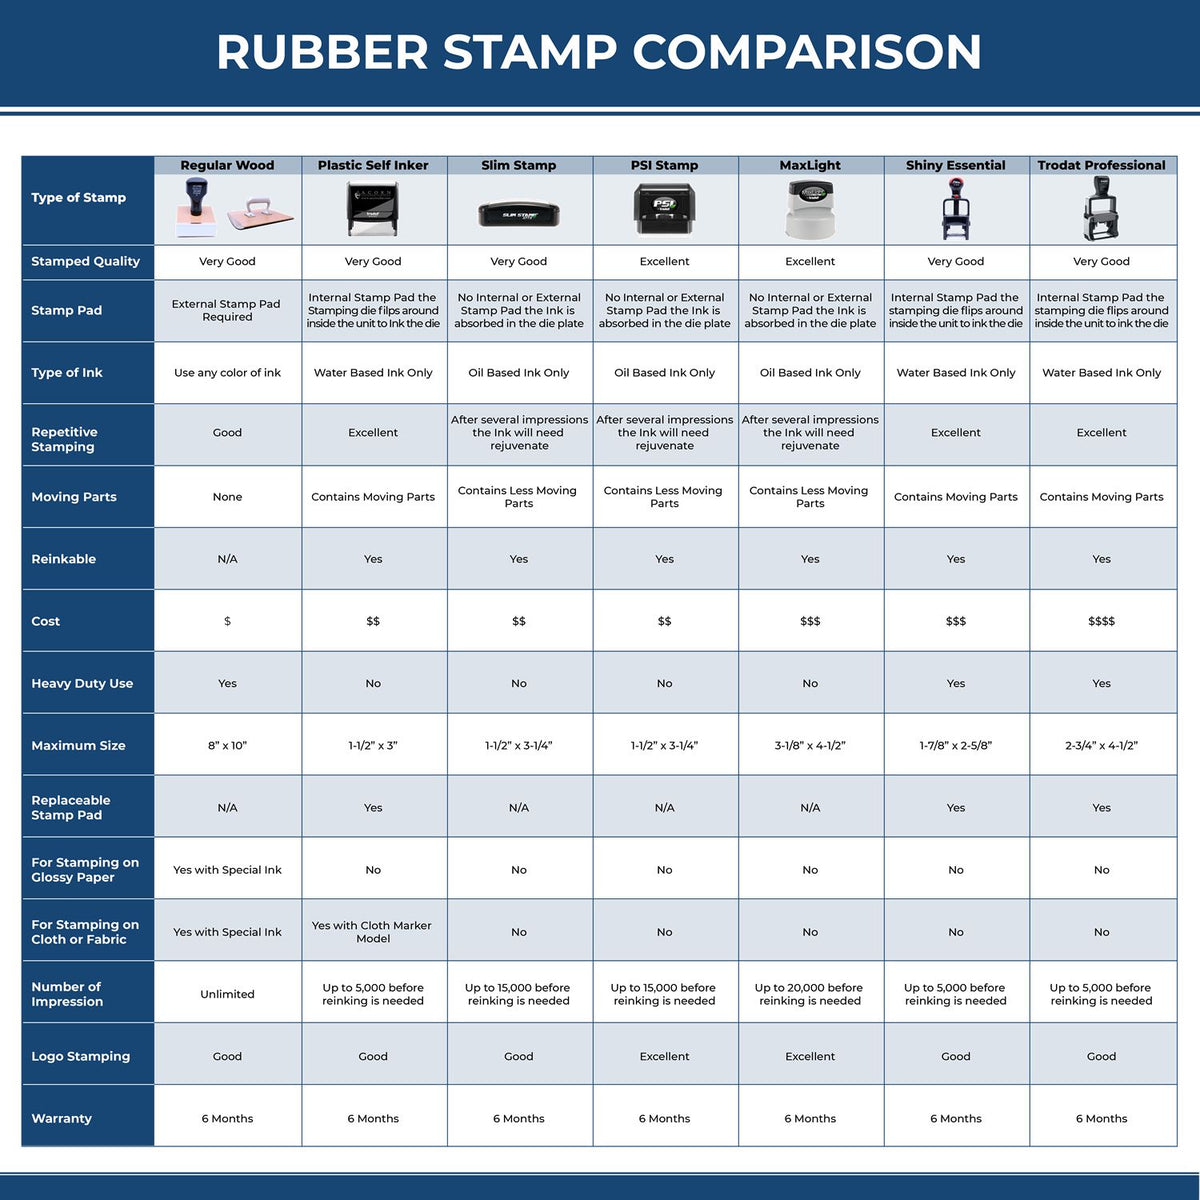 Special Standard Mail Rubber Stamp 4762R Rubber Stamp Comparison